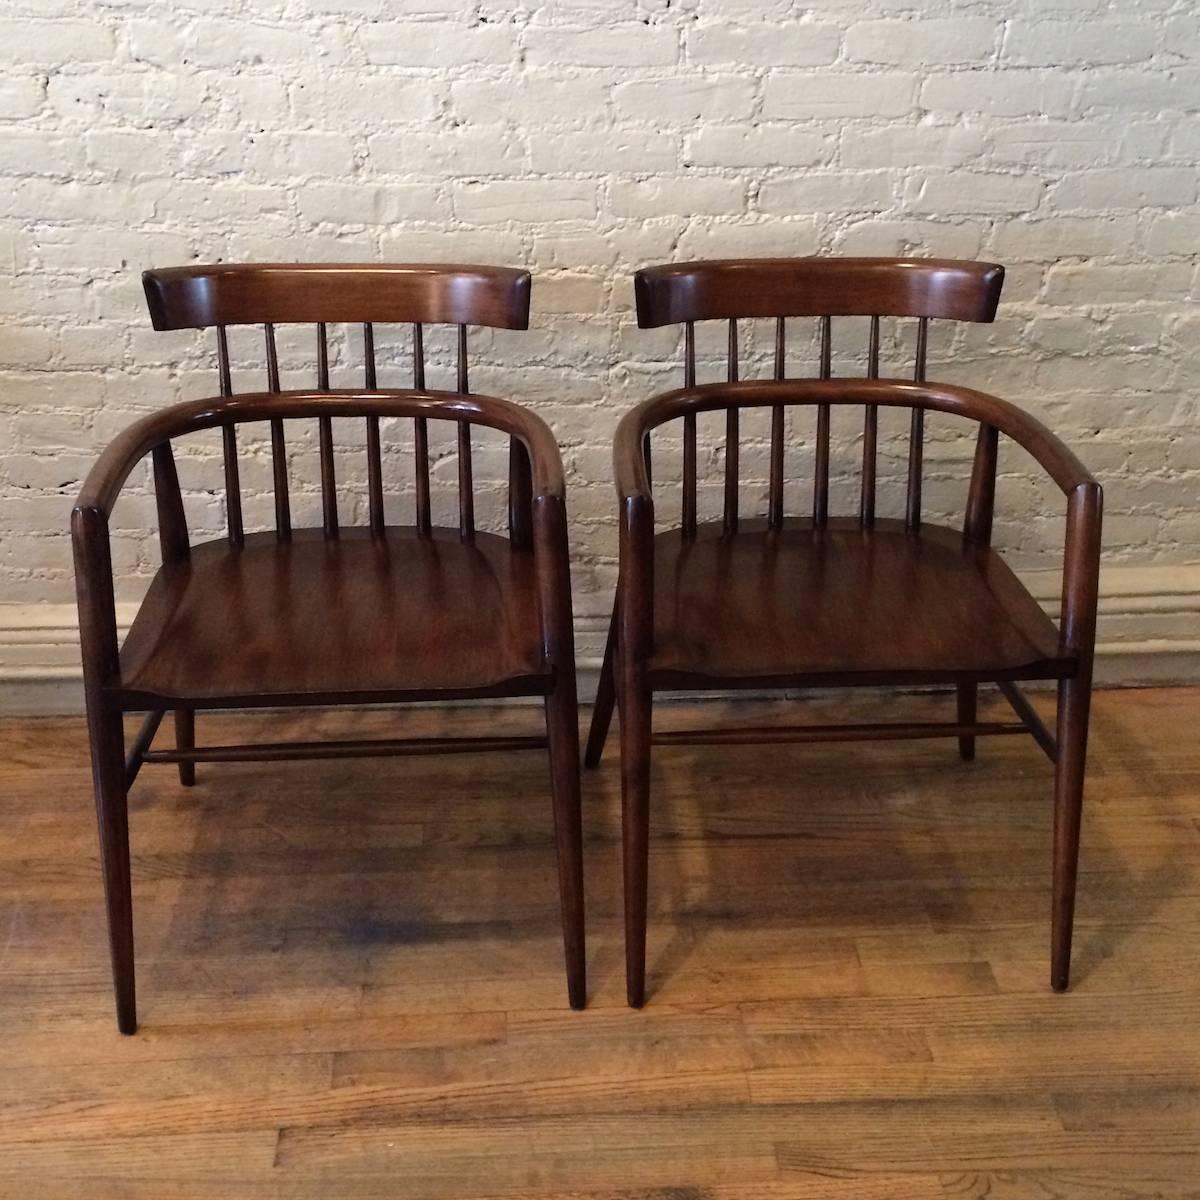 Pair of Mid-Century Modern, maple wood, spindle back, windsor style chairs by Paul McCobb for Planner Group in restored condition.